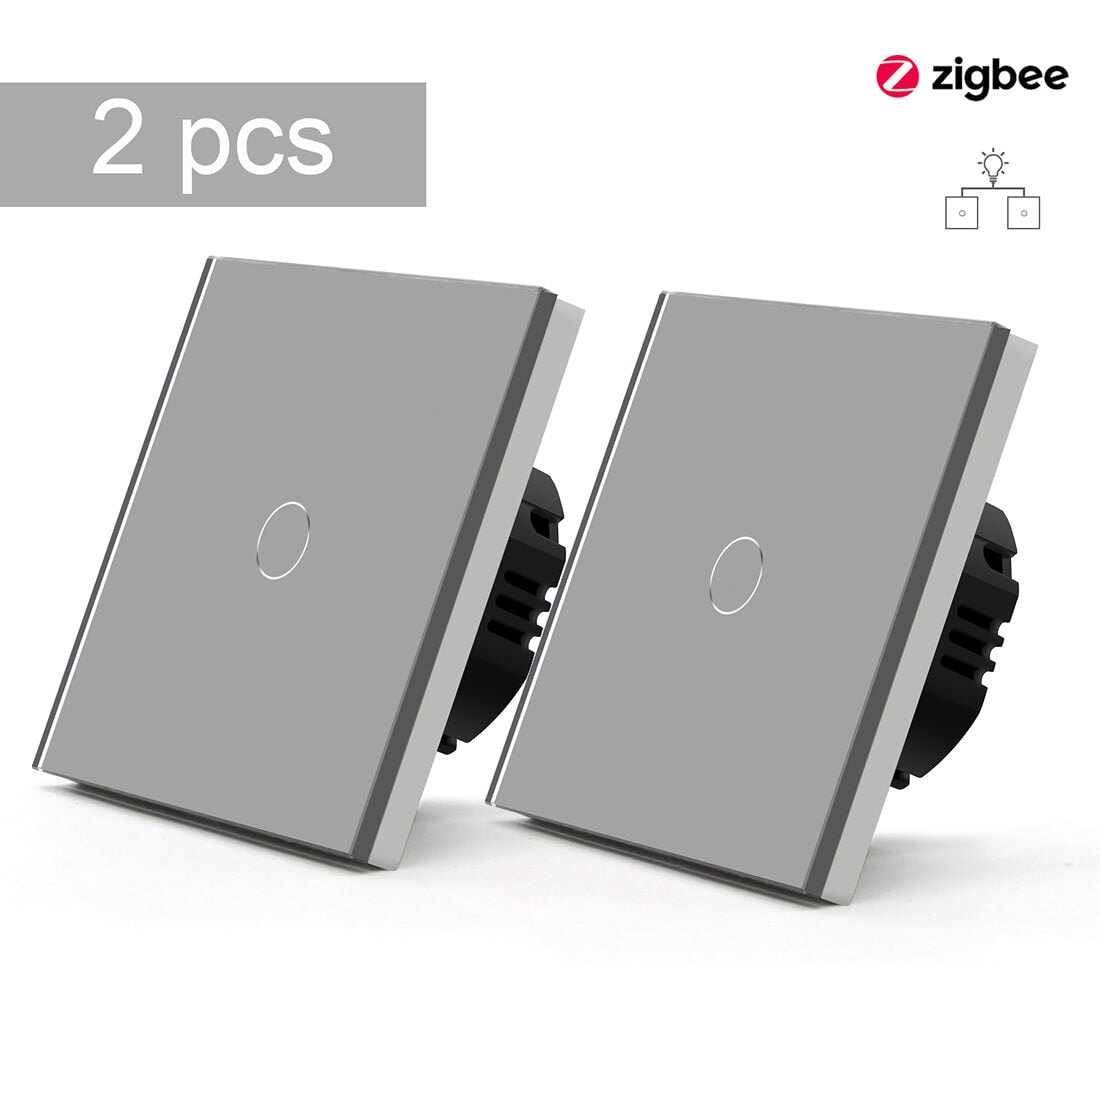 BSEED Zigbee Single Live Line Switch 1/2/3 Gang 1/2/3 Way Wall Smart Light Switch Single Live Line 1/2/3 pack Light Switches Bseedswitch Grey 1Gang 2 Pcs/Pack